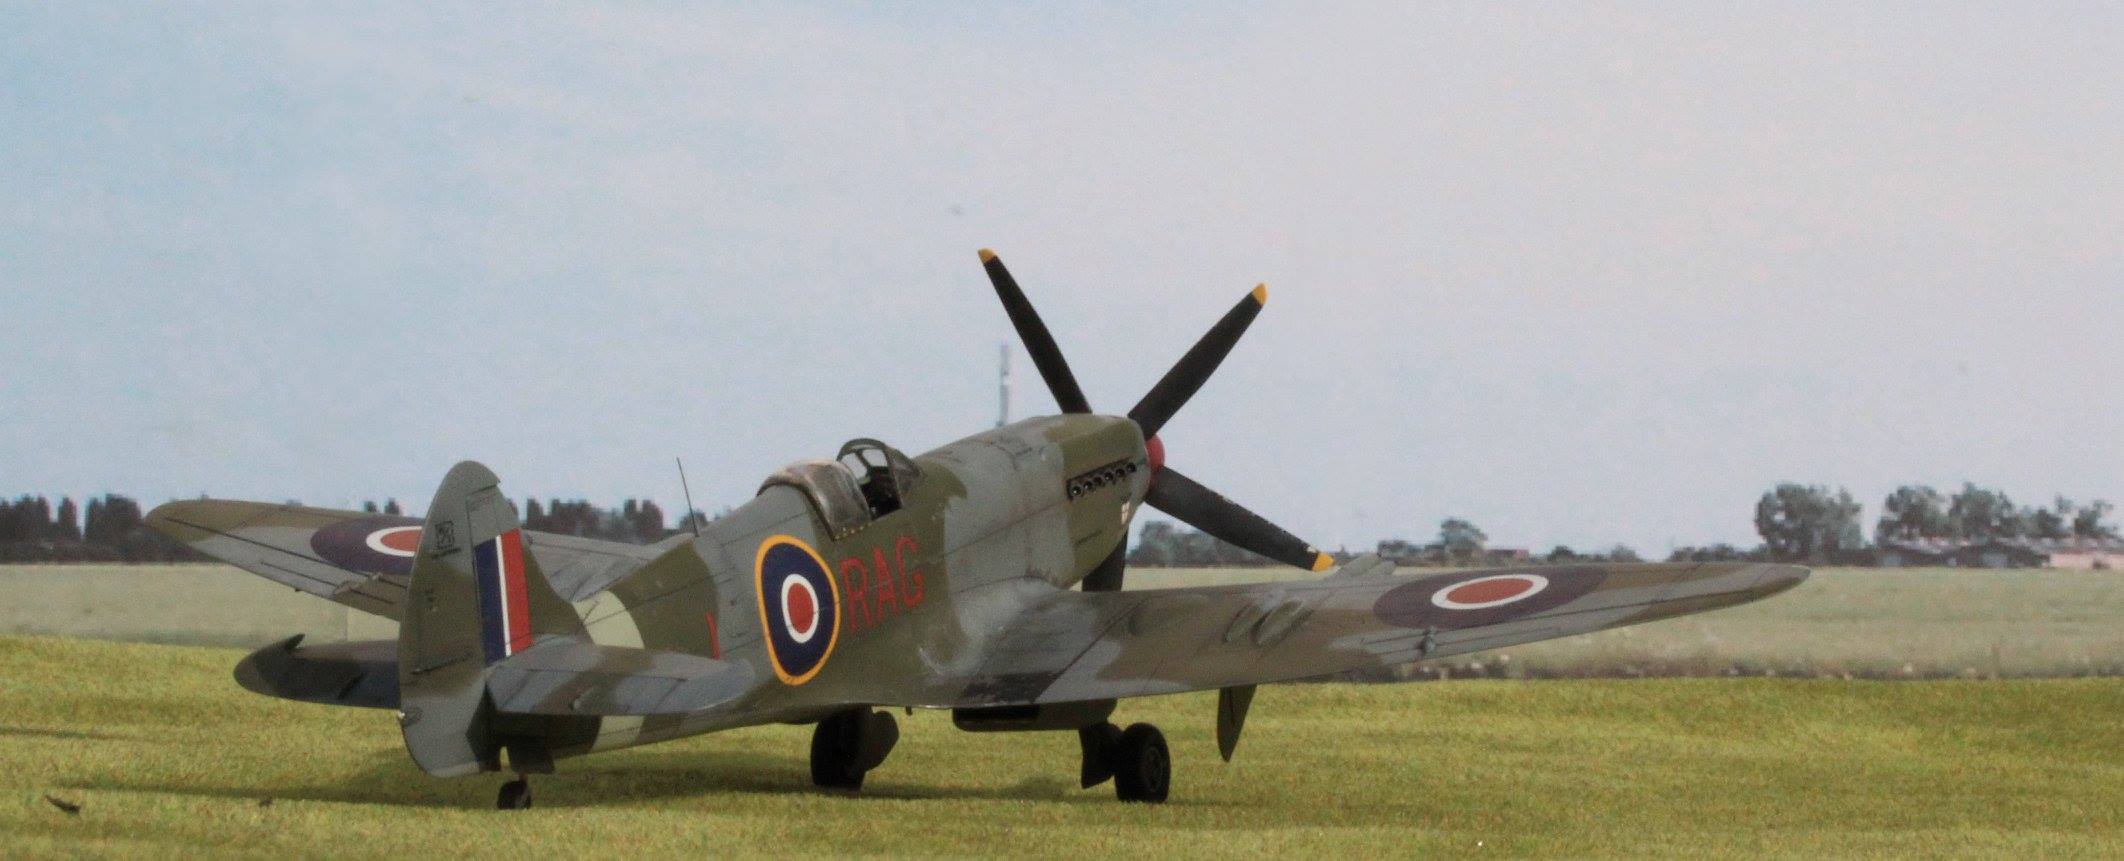 Spitfire F Mk 21 of 600 Squadron (County of London) RAuxAF, Biggin Hill, 1947. Airfix kit-bash in 1/48th scale.